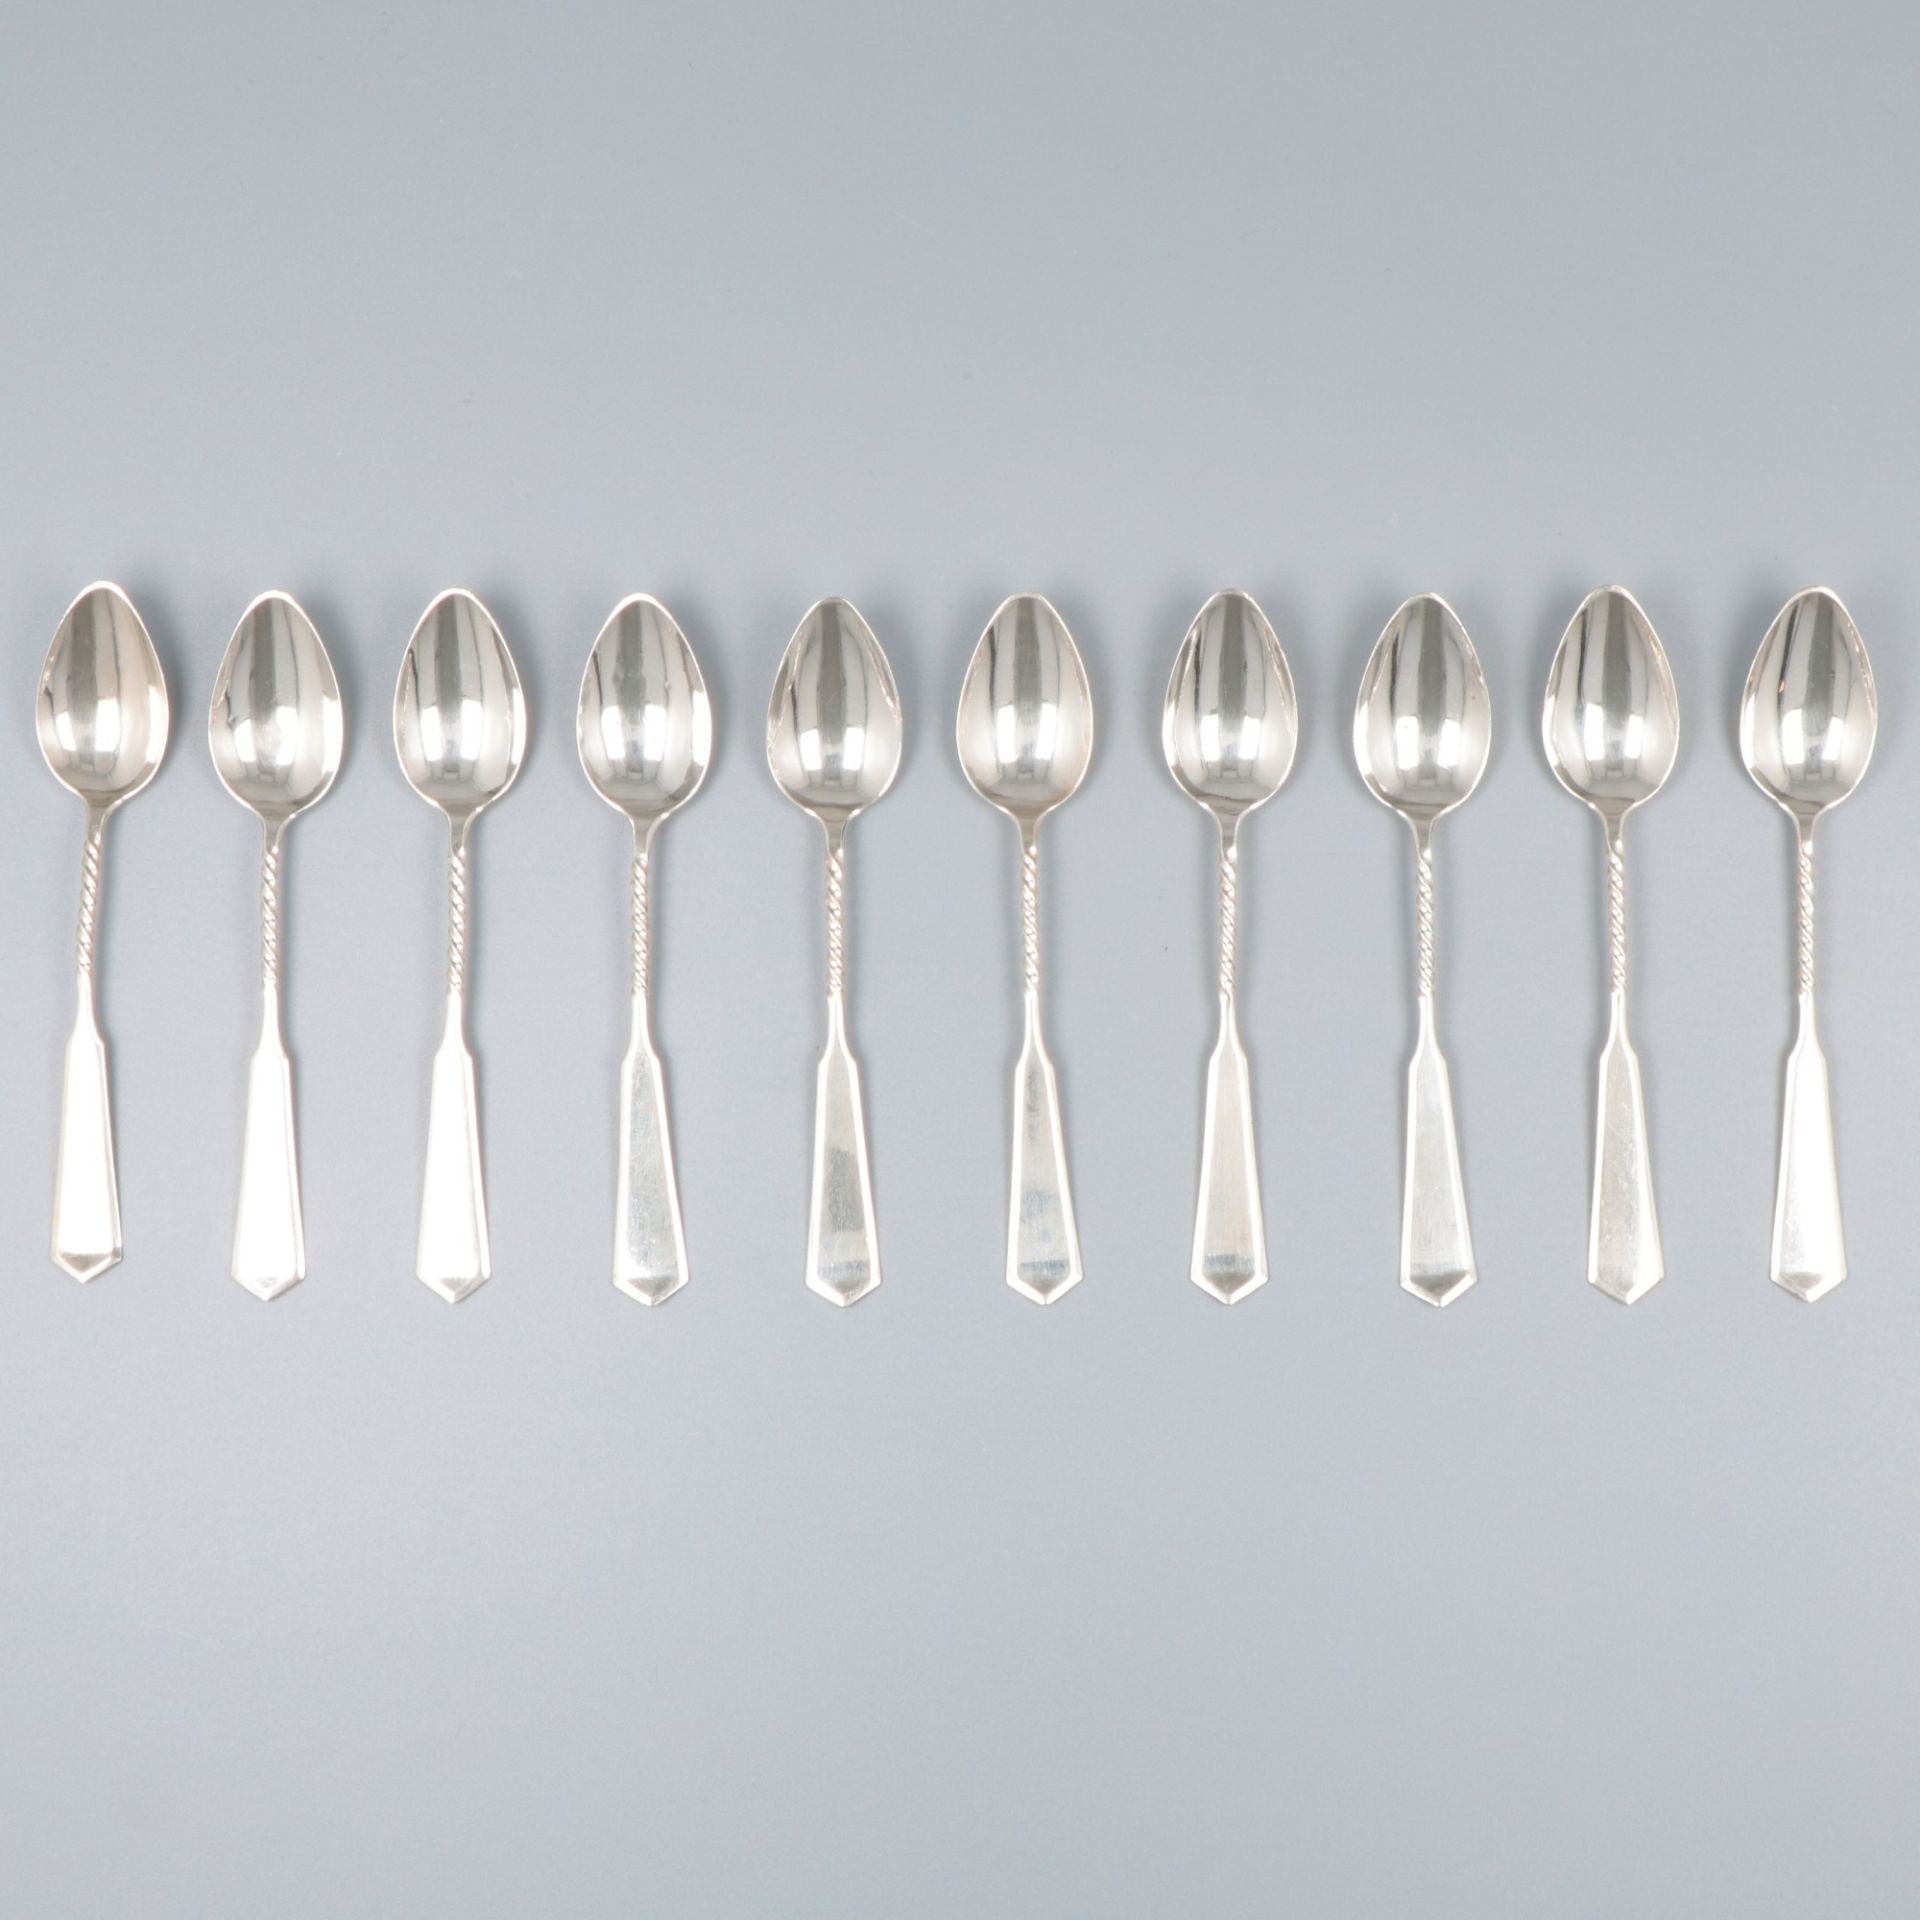 10-piece set of coffee spoons silver.